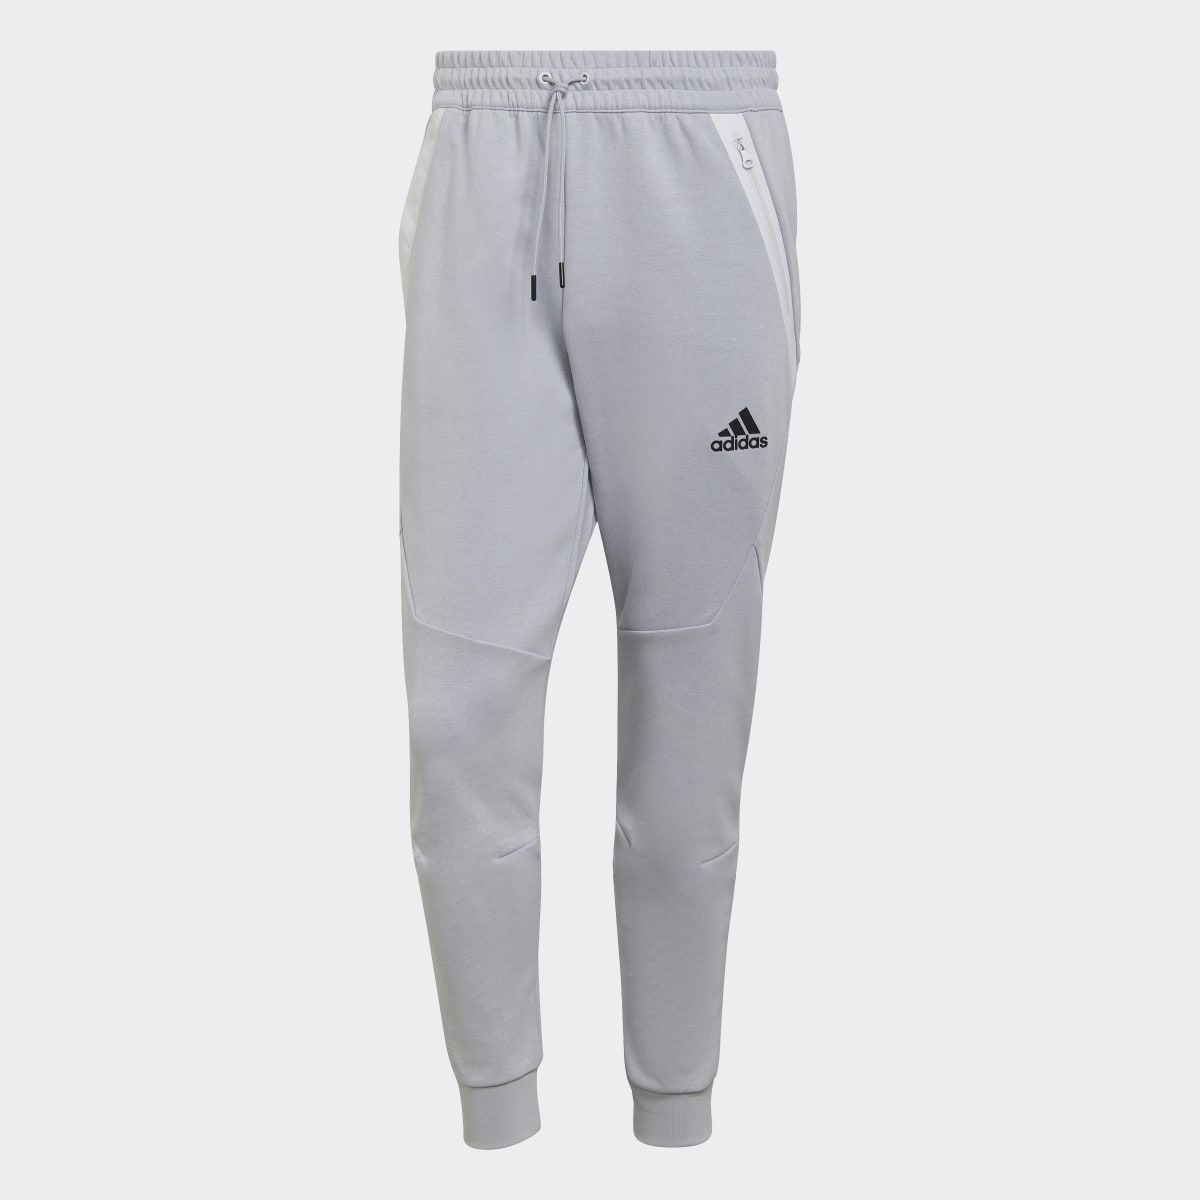 Adidas Designed for Gameday Joggers. 4